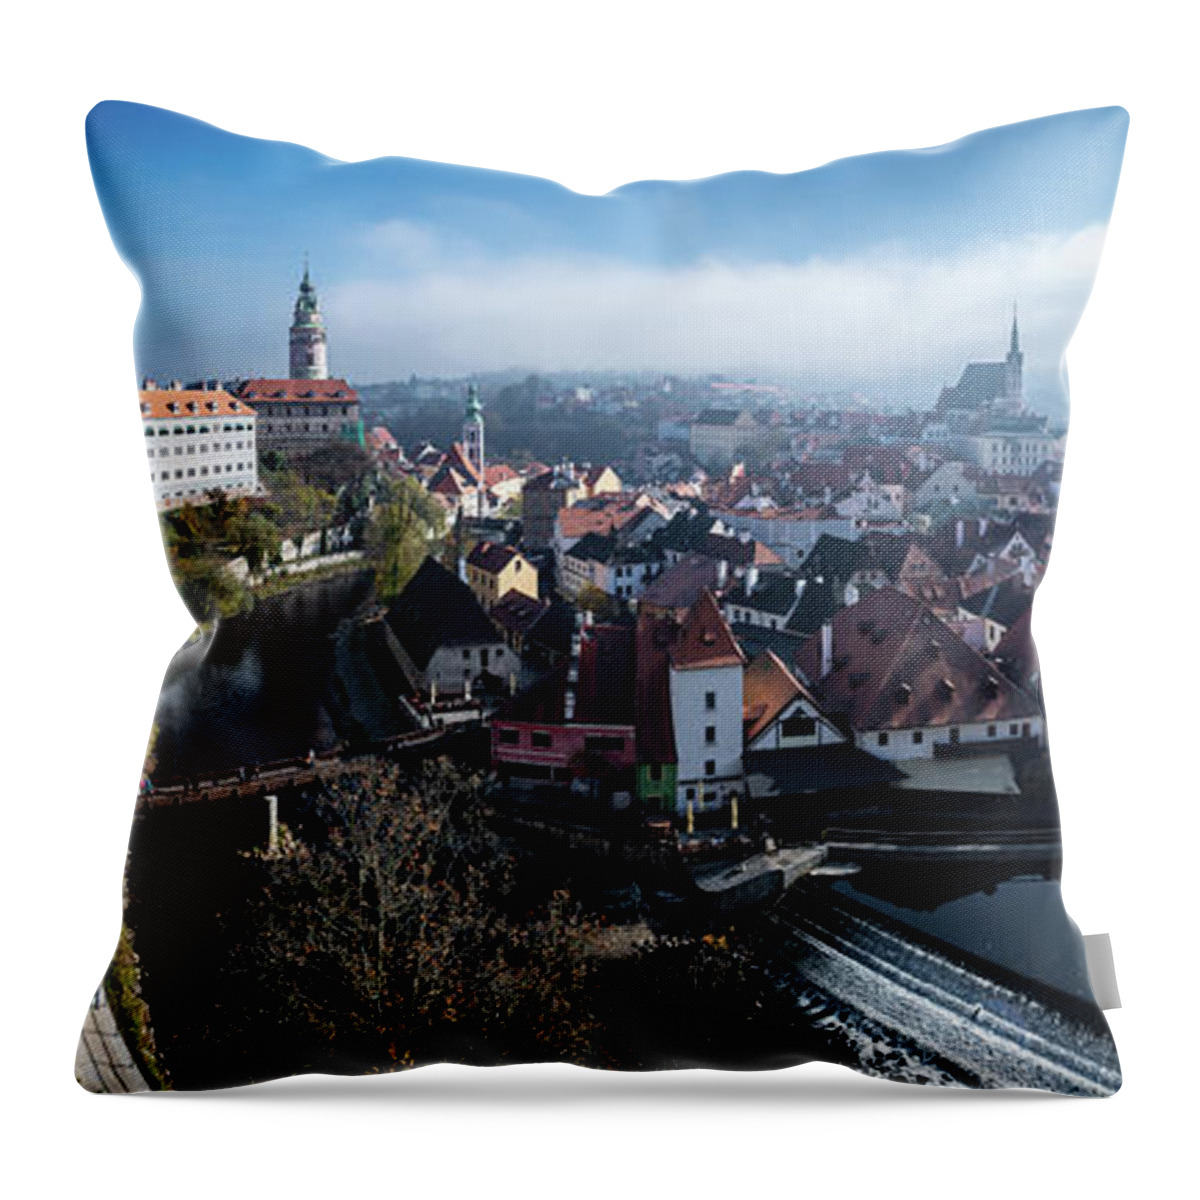 Czech Republic Throw Pillow featuring the photograph Historic City Of Cesky Krumlov In The Czech Republic In Europe by Andreas Berthold